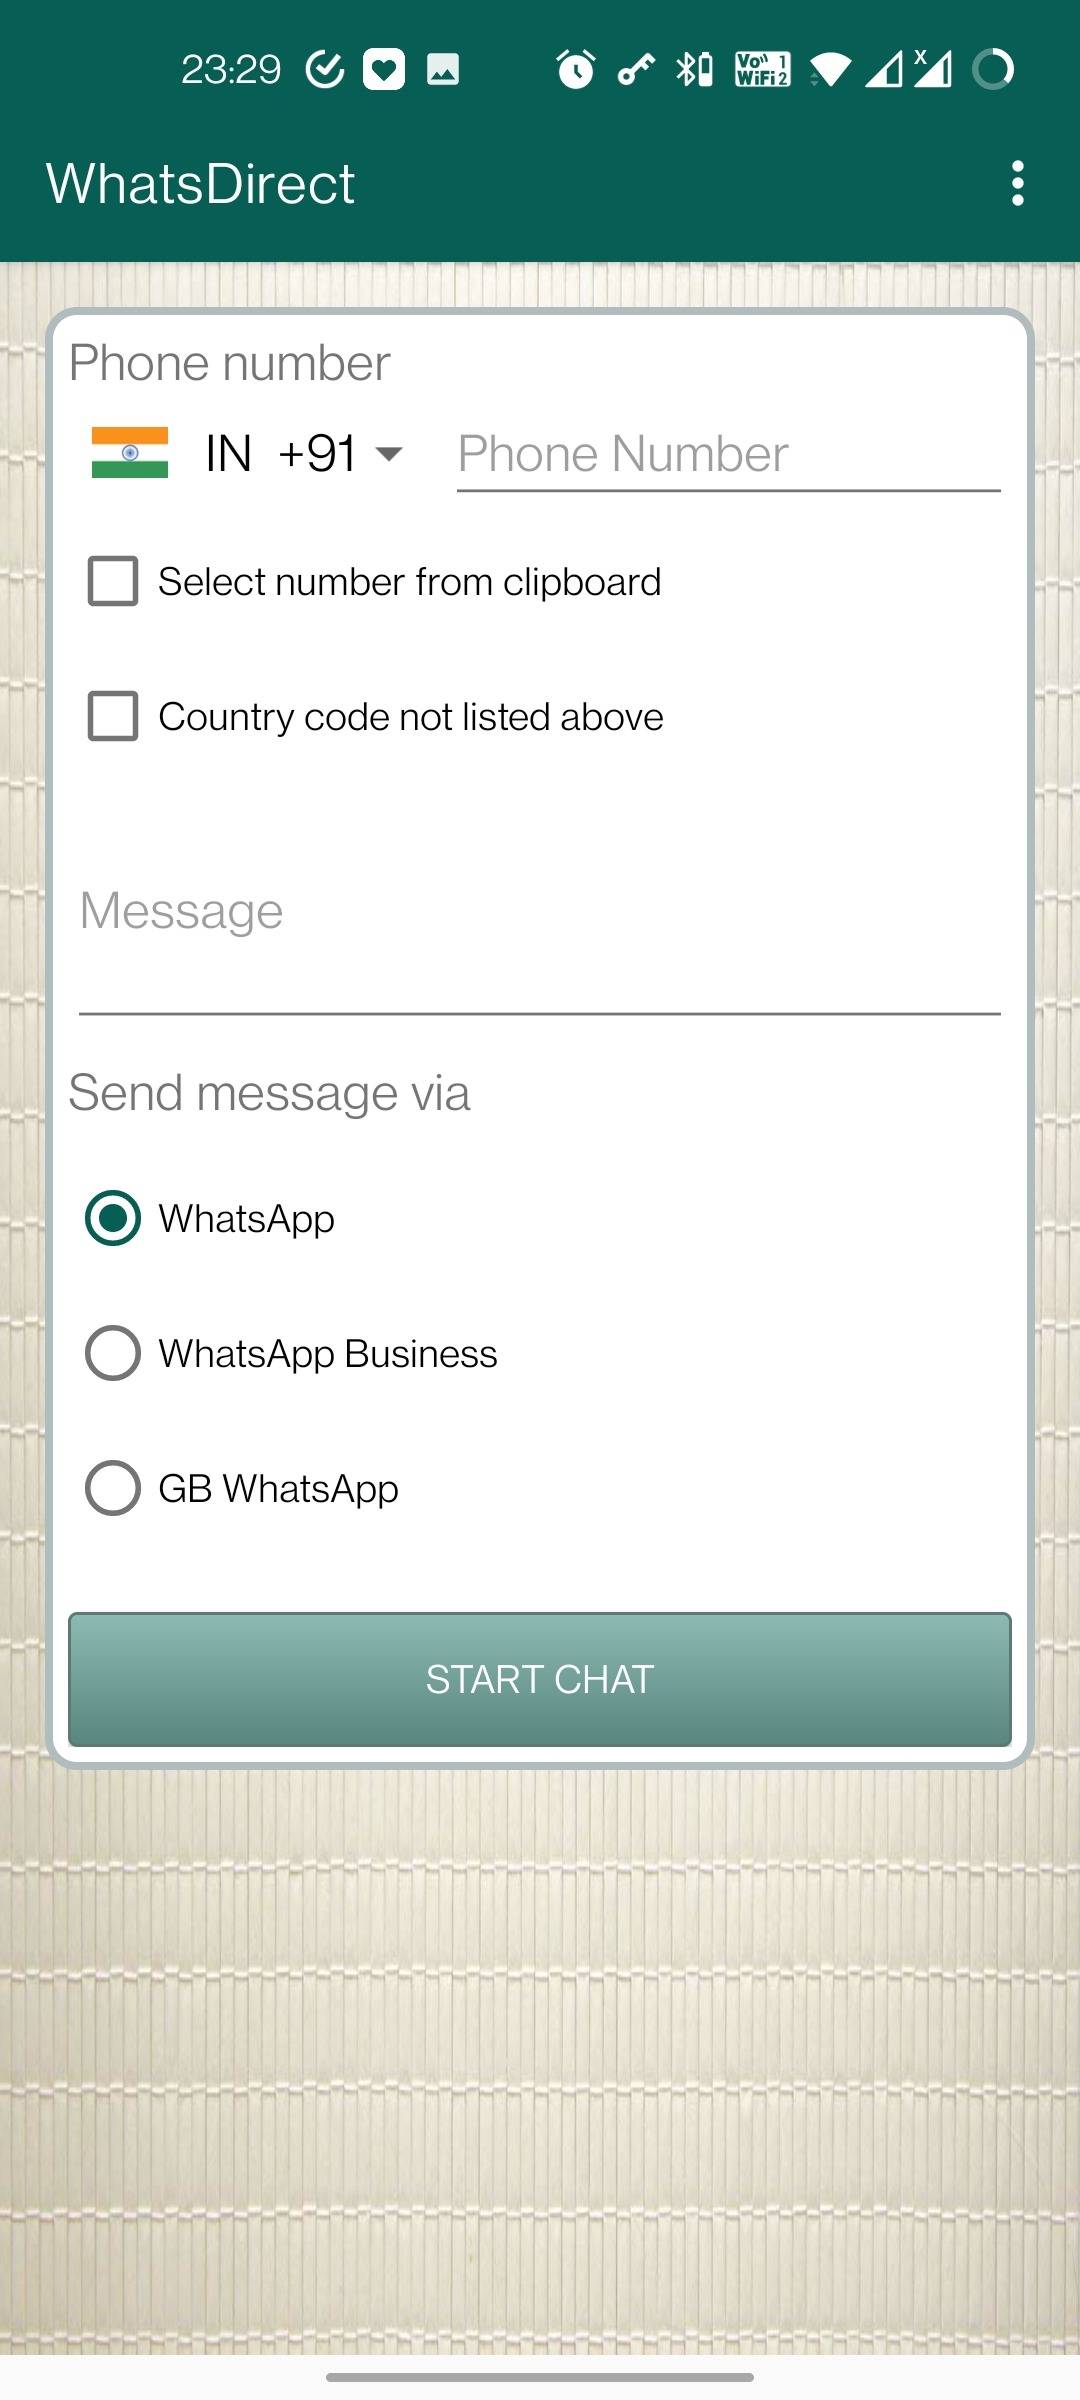 For whatsapp chat numbers WhatsApp Direct